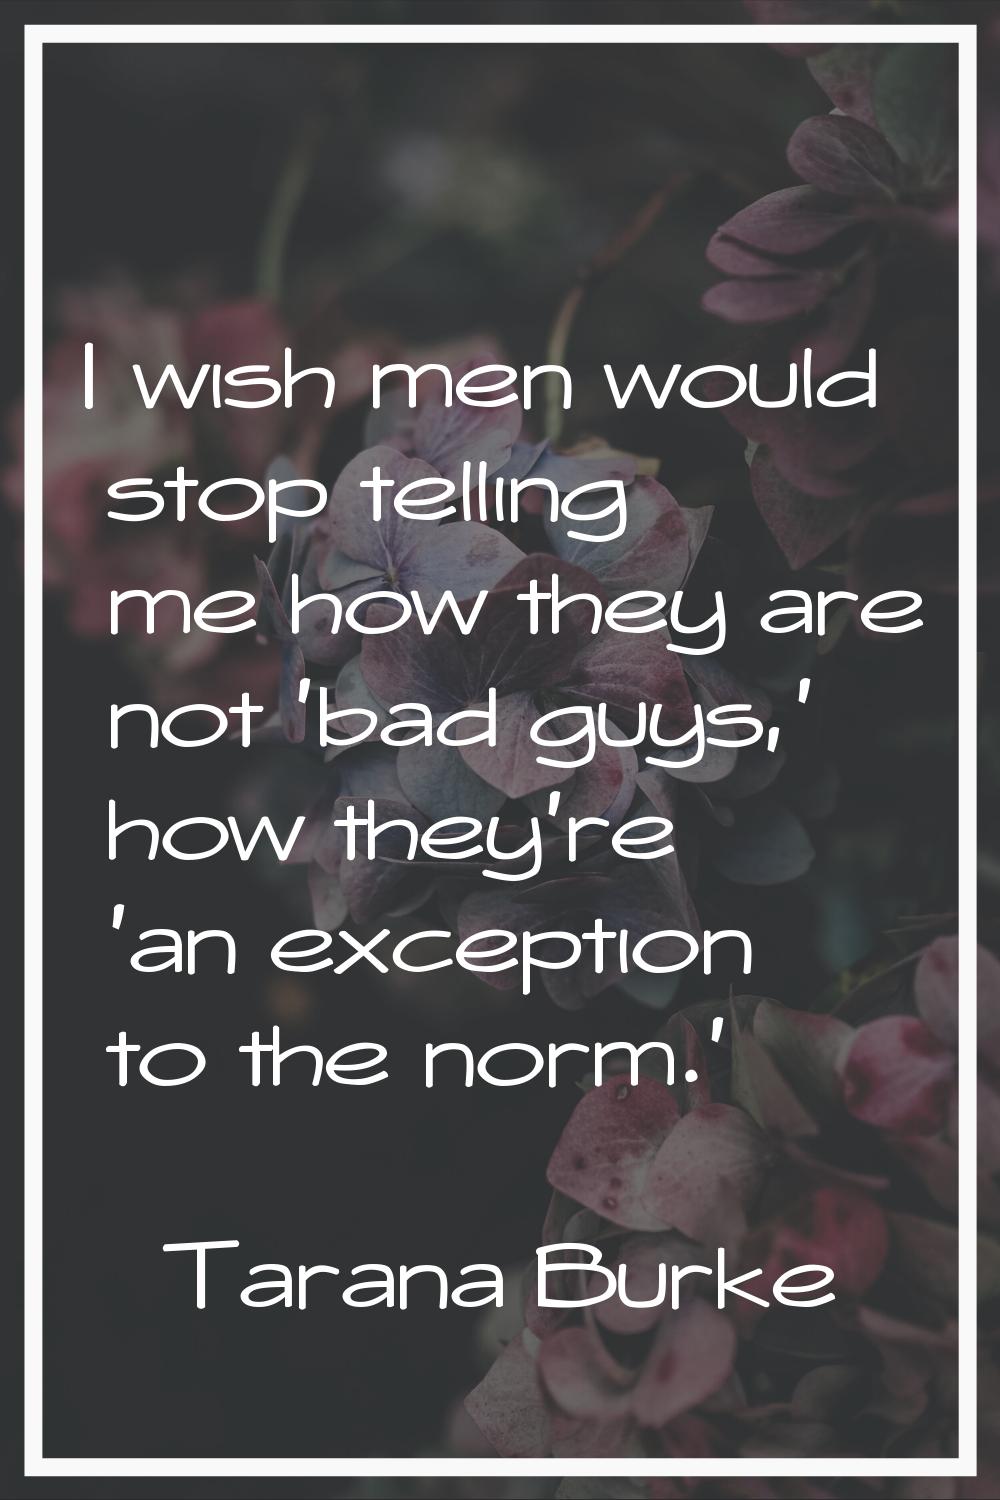 I wish men would stop telling me how they are not 'bad guys,' how they're 'an exception to the norm